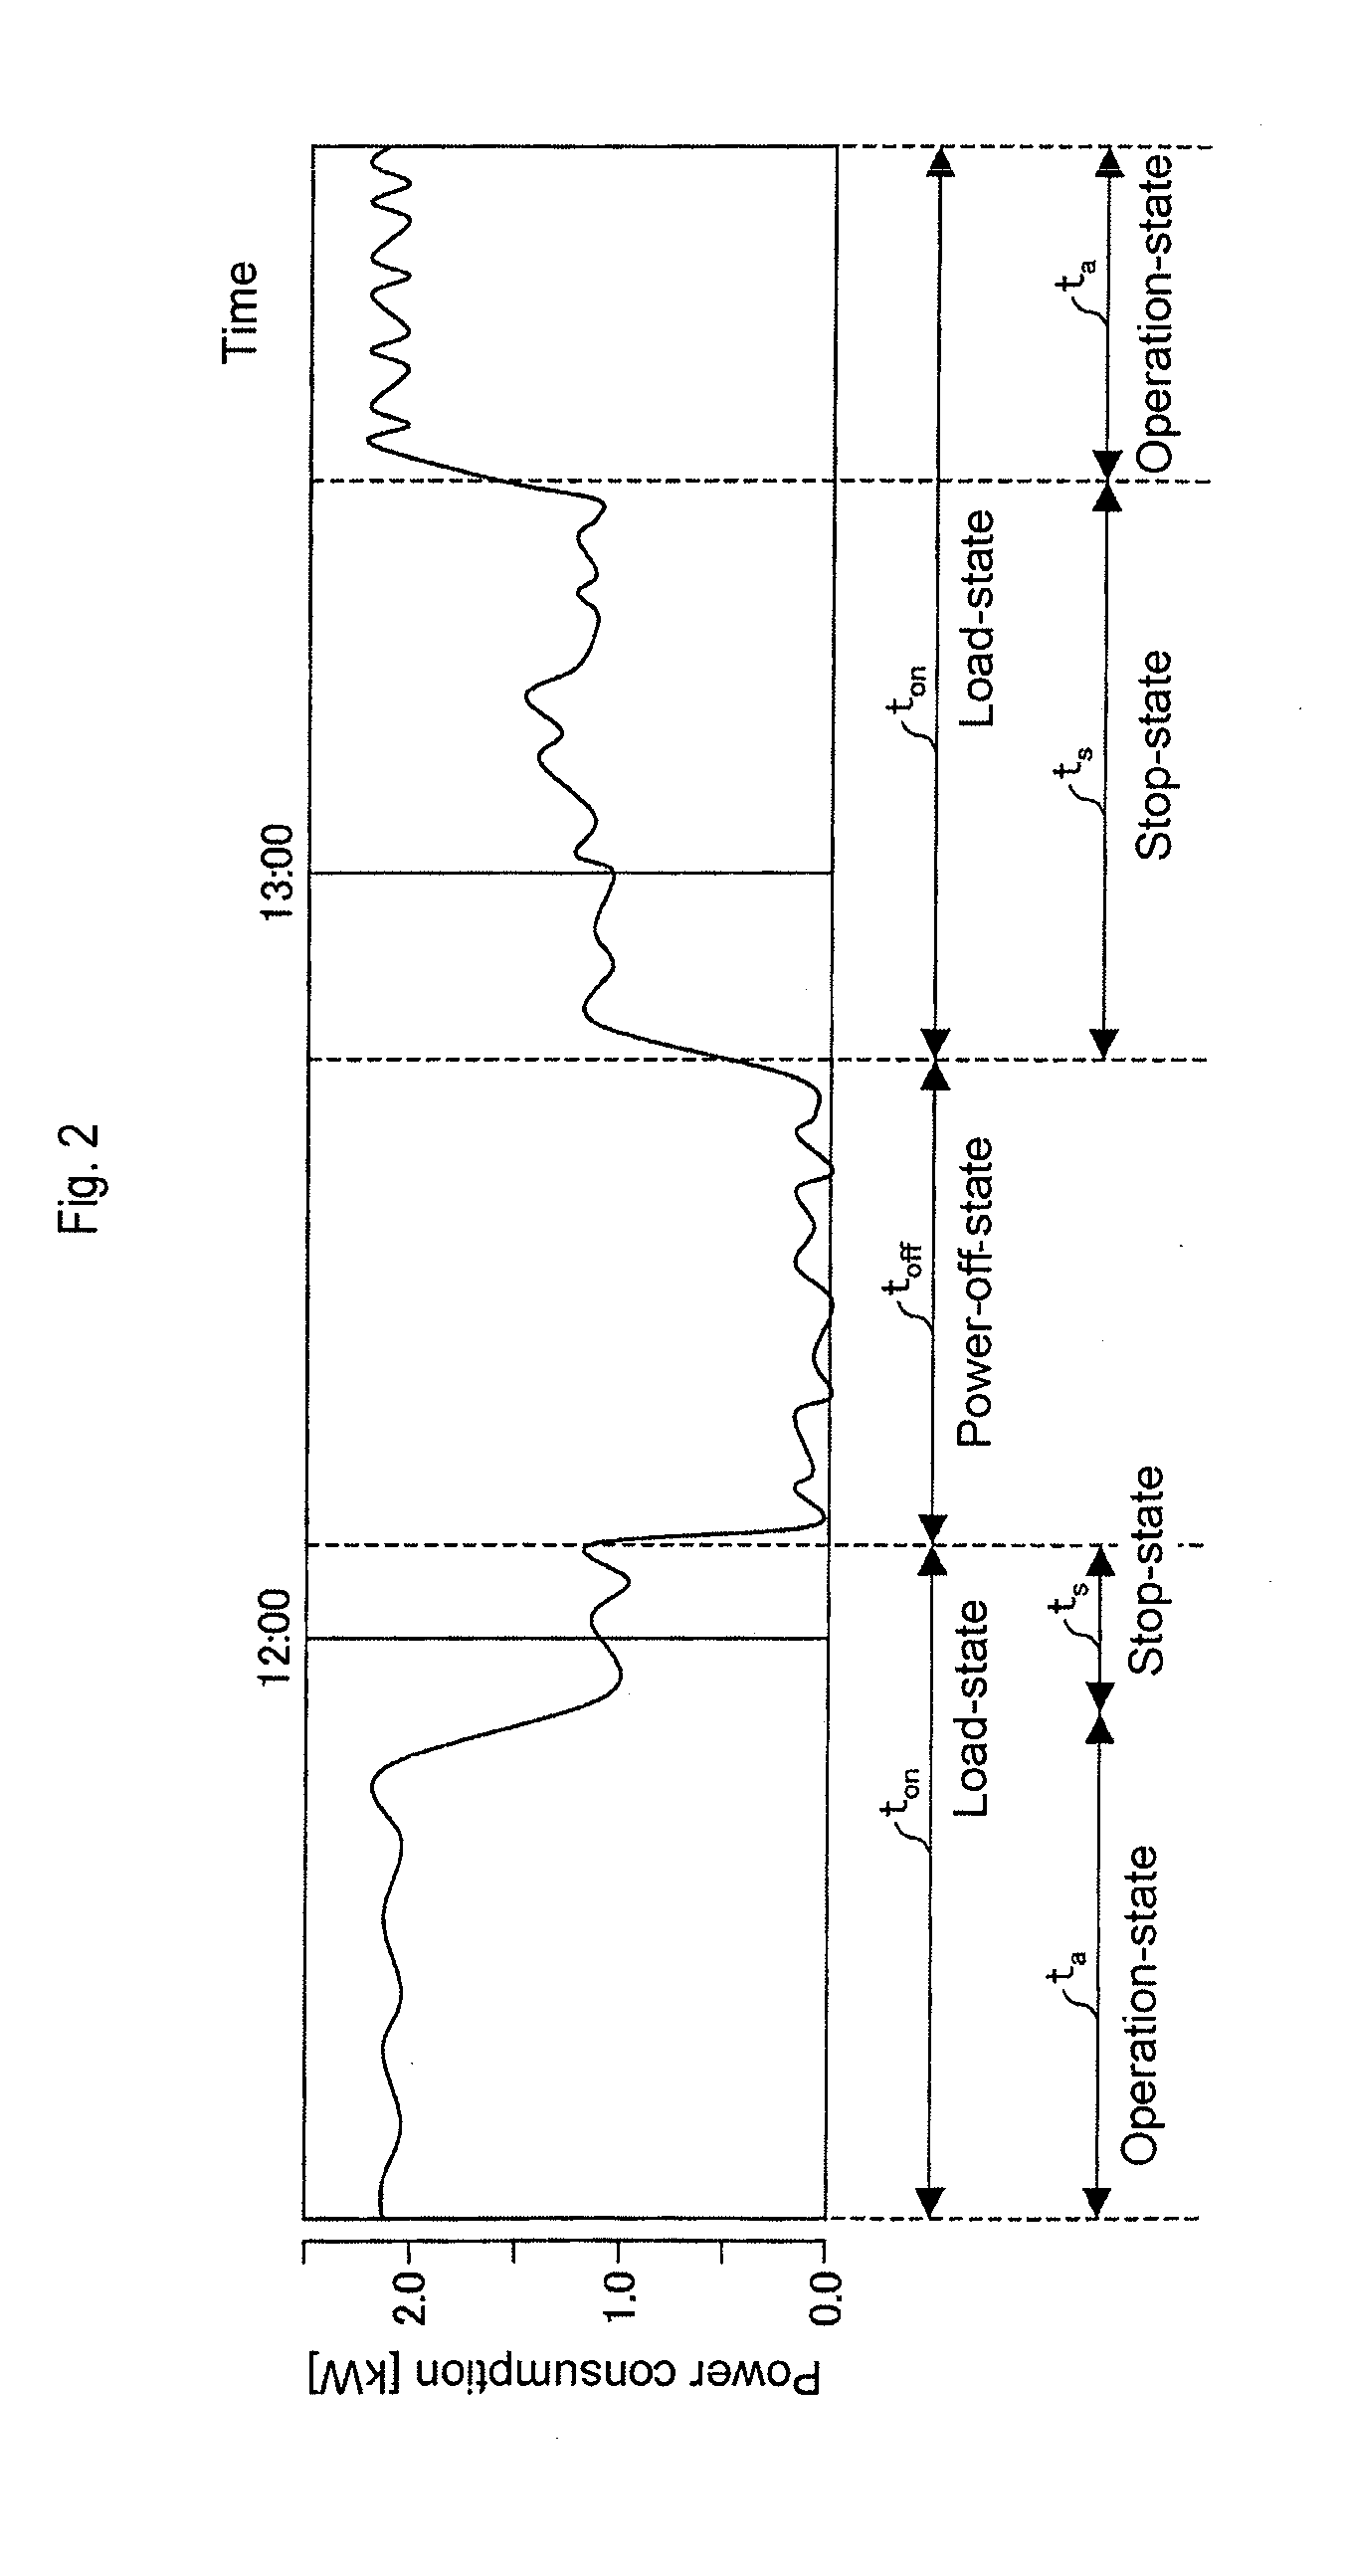 Operation information output device, method for controlling operation information output device, monitoring device, method for controlling monitoring device, and control program